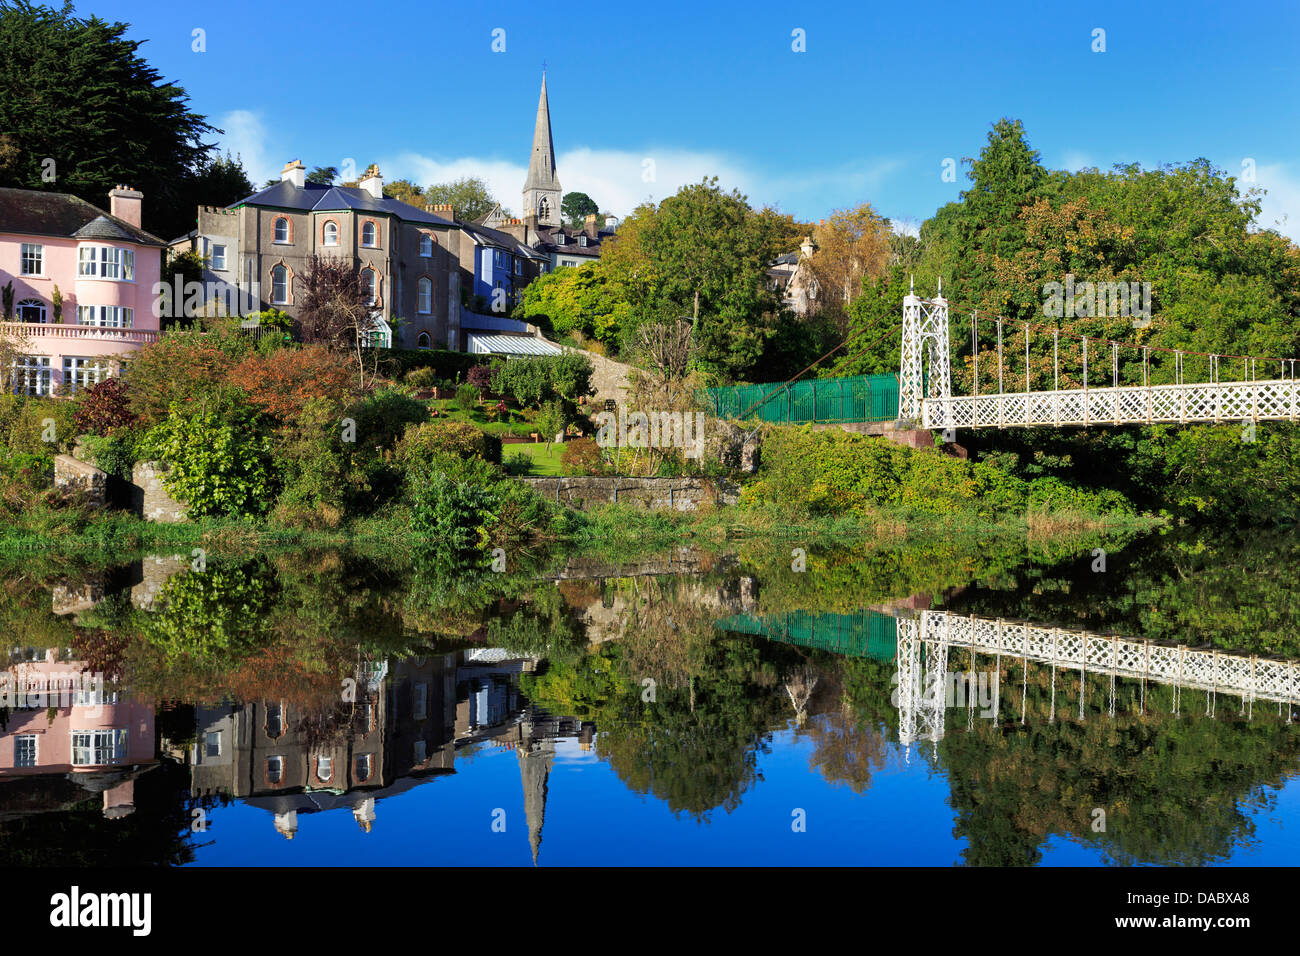 Reflection of houses on the River Lee near Fitzgerald's Park, Mardyke, Cork City, County Cork, Munster, Republic of Ireland Stock Photo